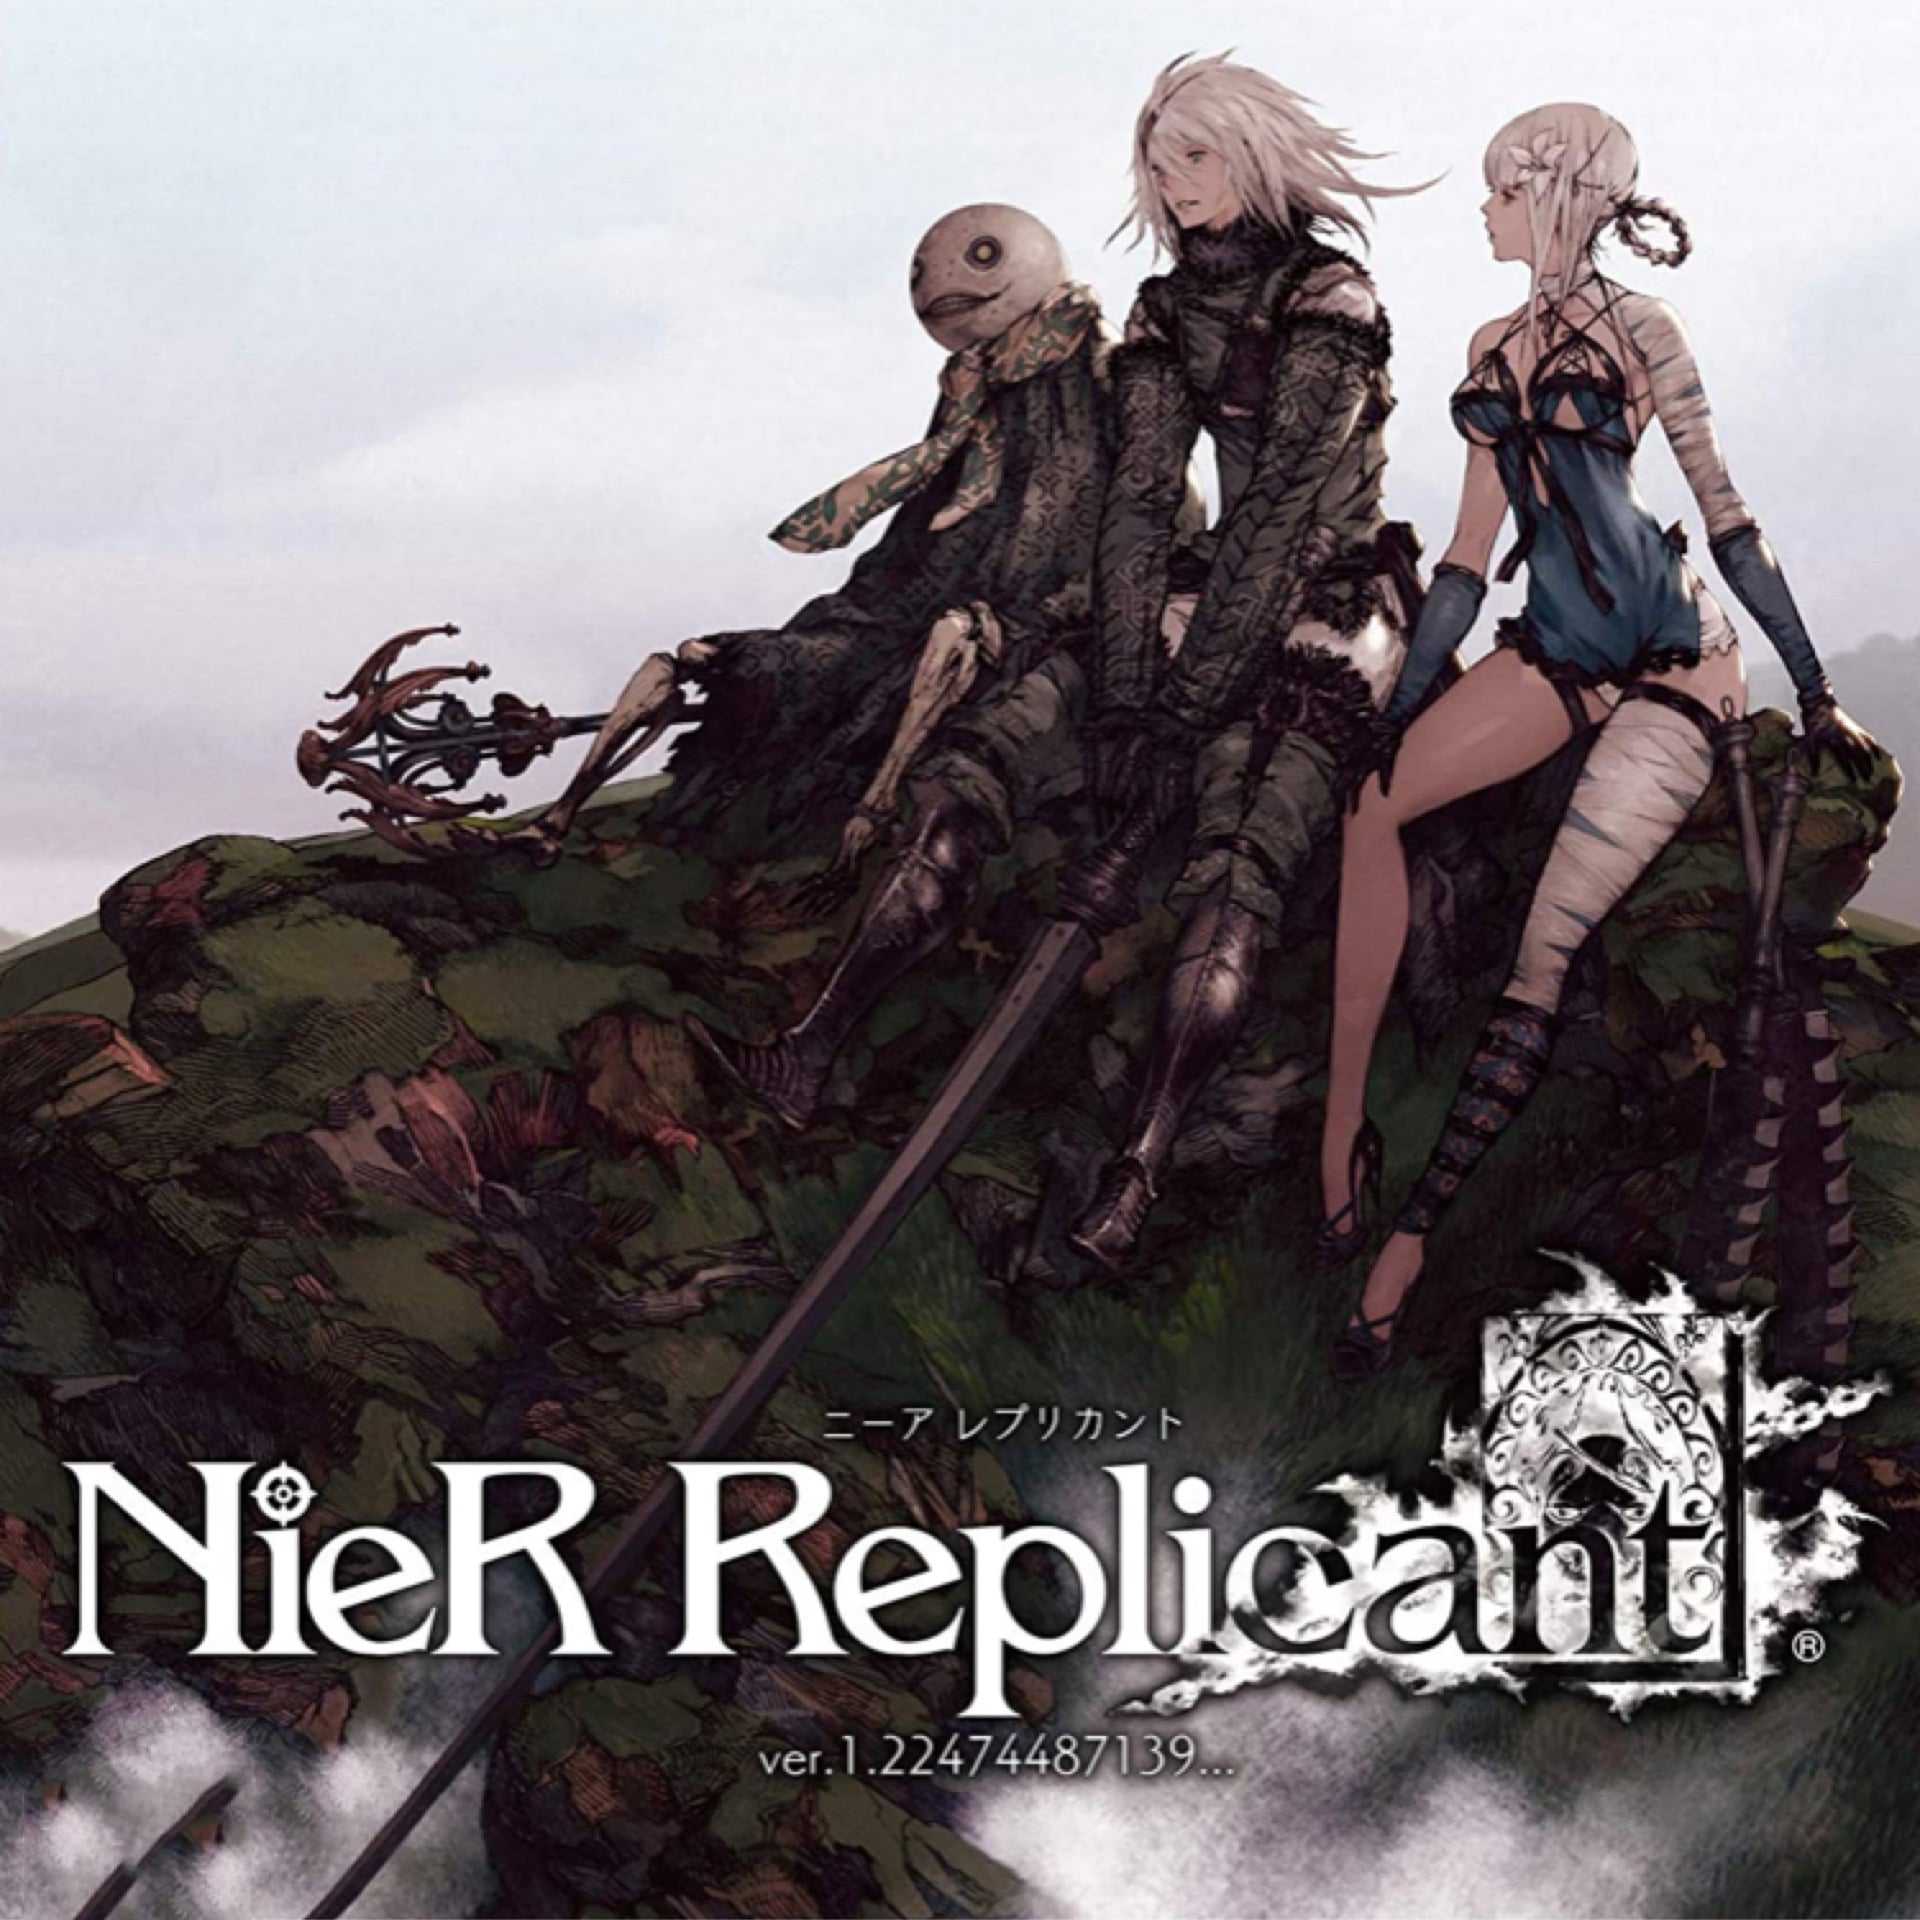 Nier Replicant Background - KoLPaPer - Awesome Free HD Wallpapers.